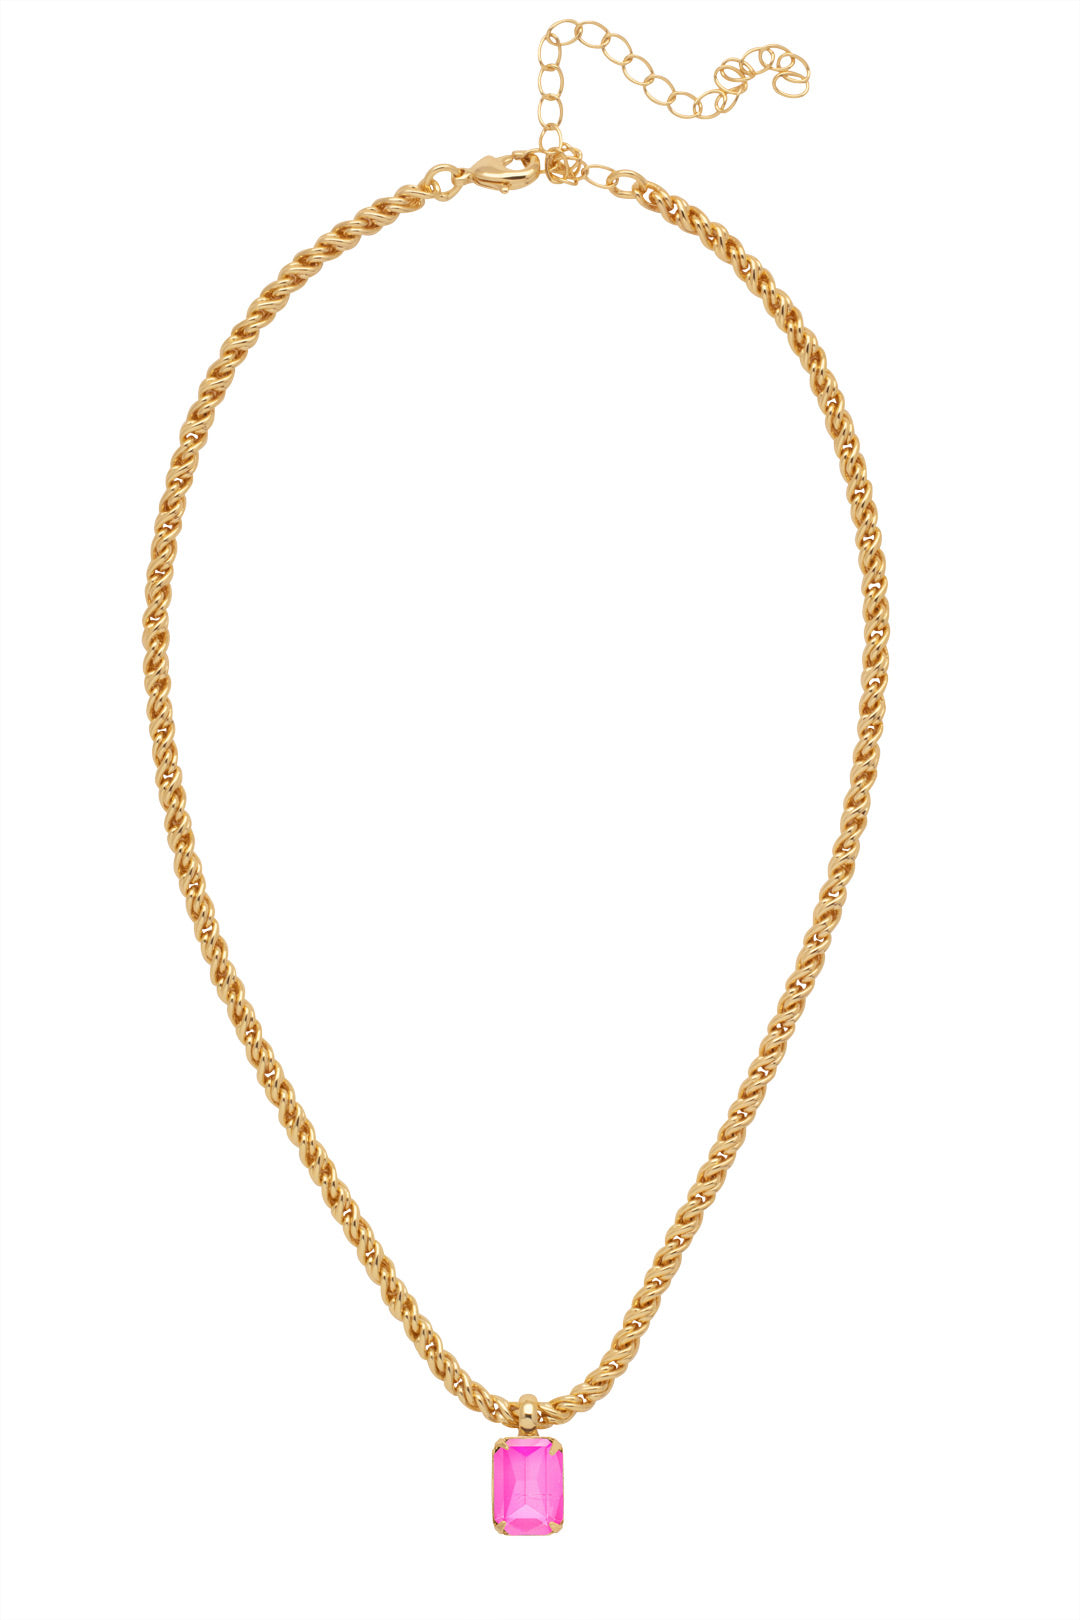 Emerald Rope Chain Pendant Necklace - NCT110BGETP - <p>The Emerald Rope Chain Pendant Necklace features an emerald cut pendant on an adjustable rope chain, secured by a lobster claw clasp. From Sorrelli's Electric Pink collection in our Bright Gold-tone finish.</p>